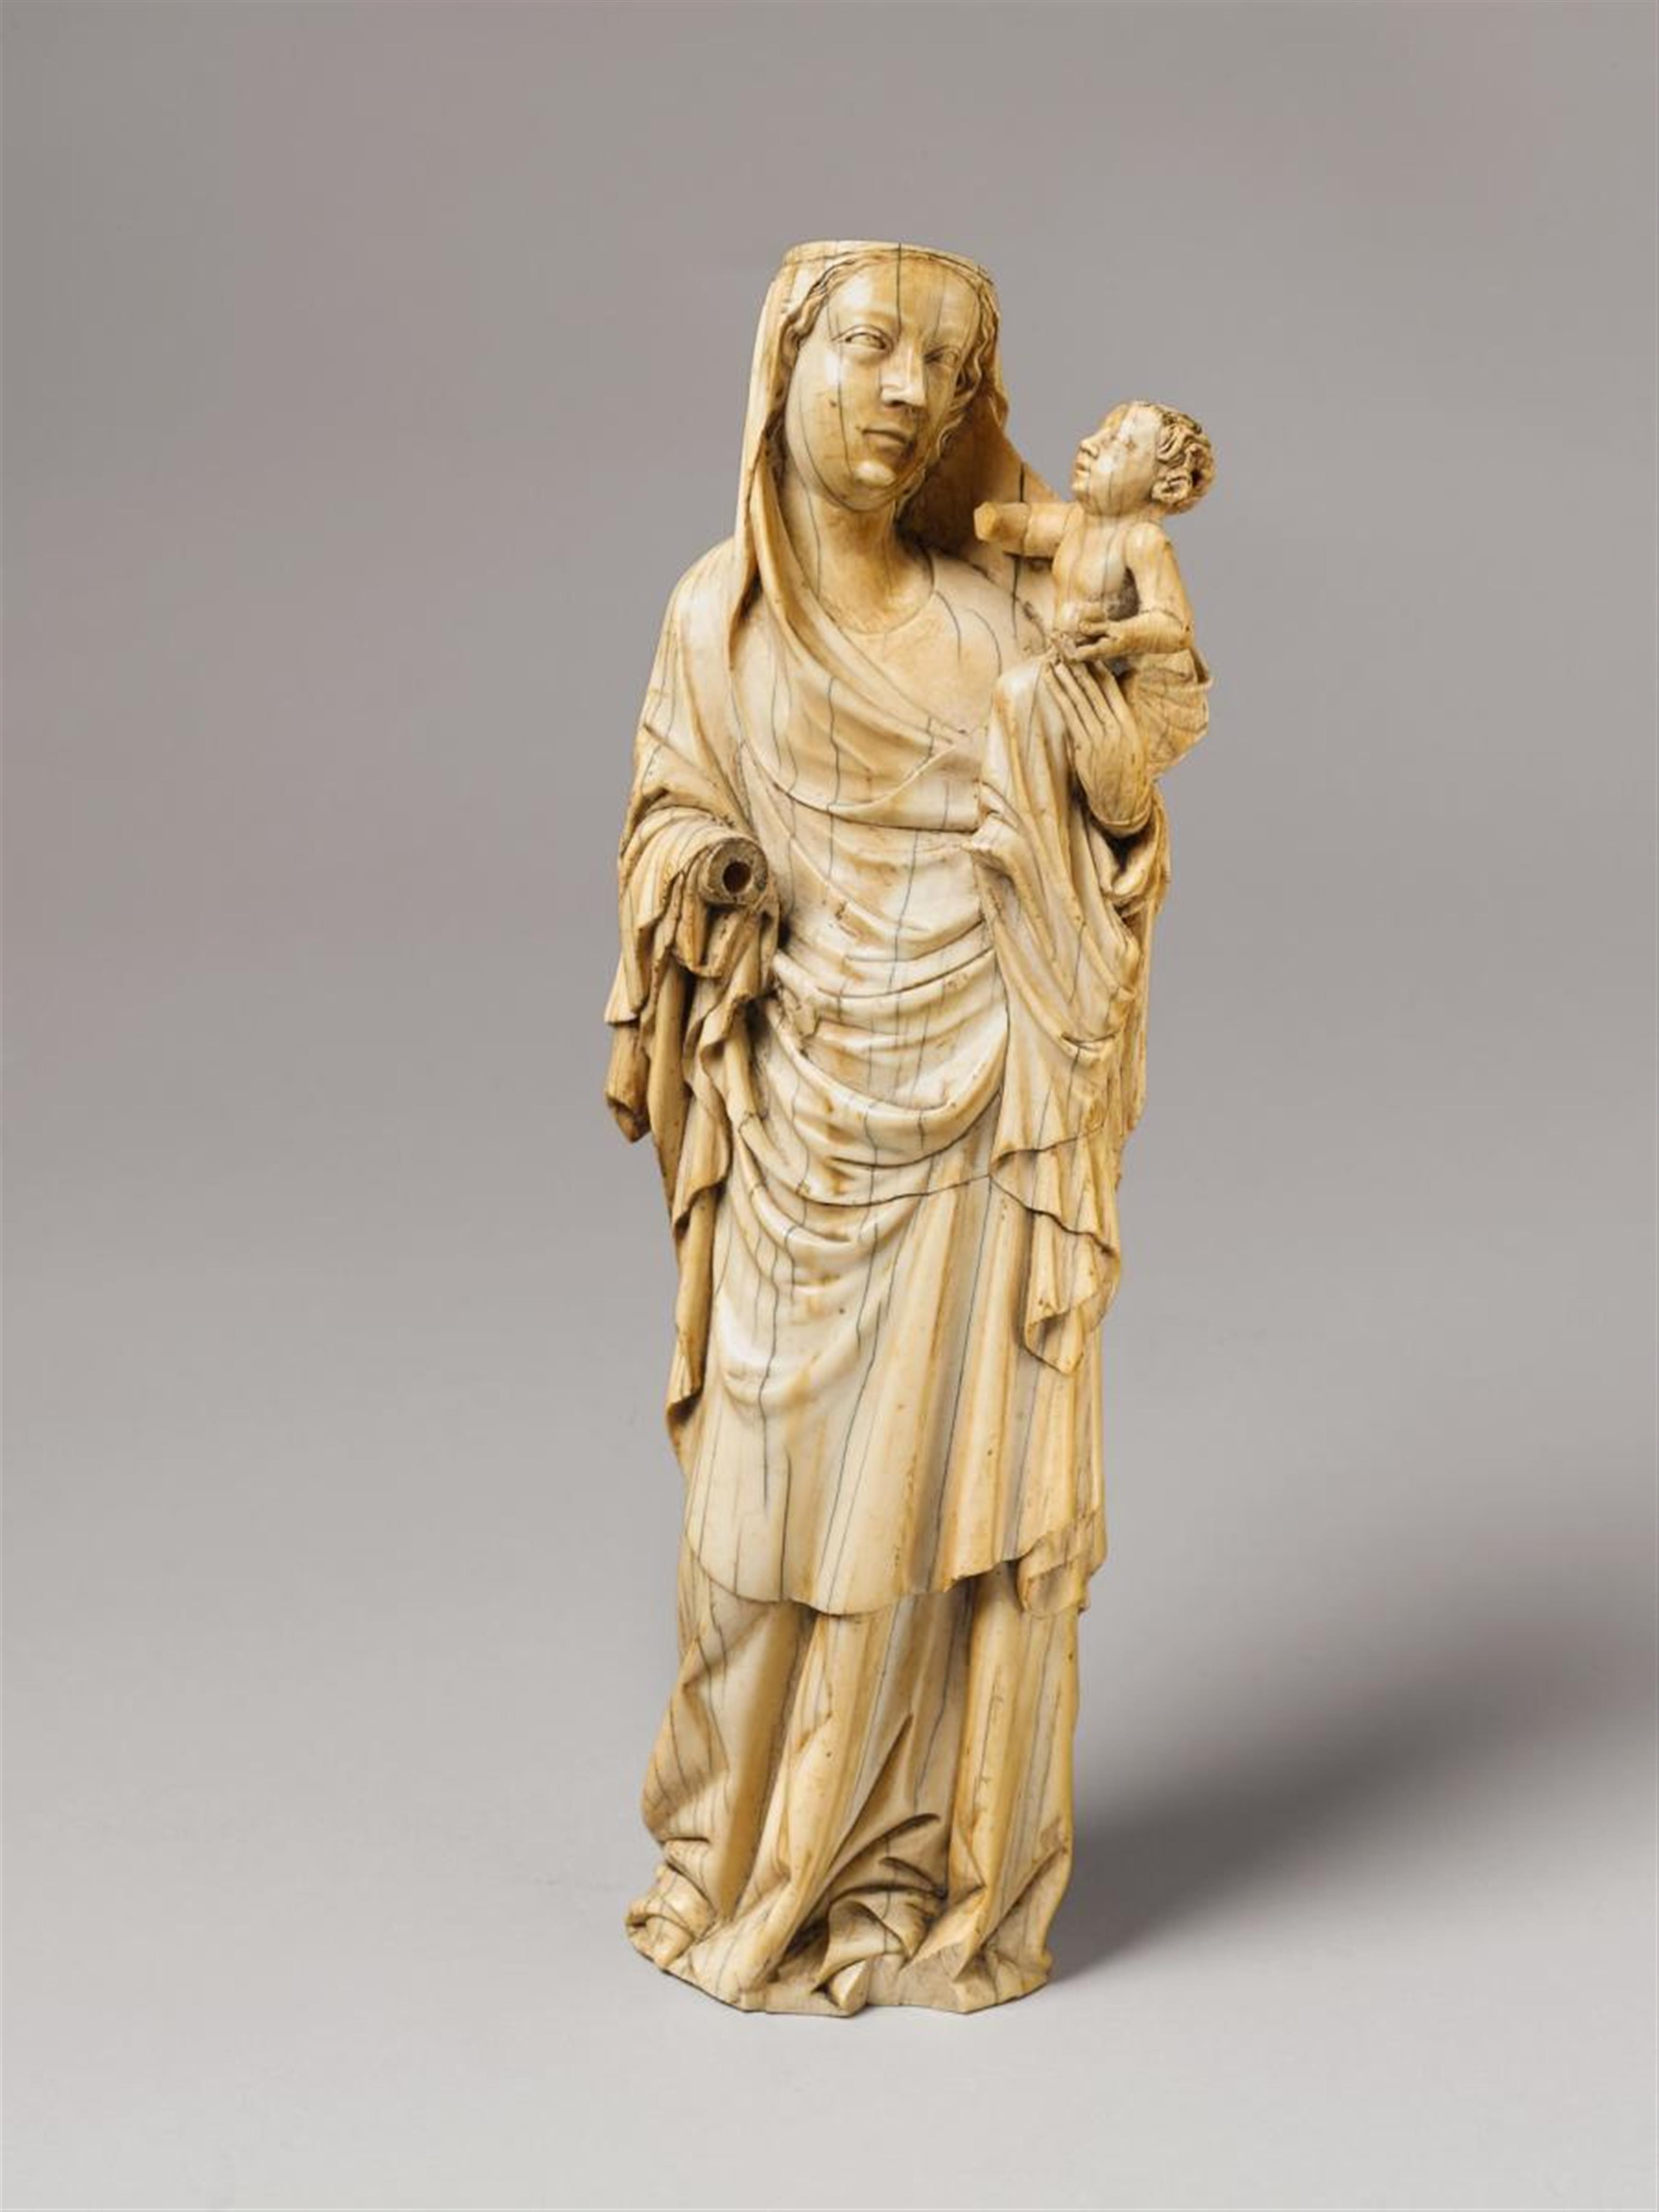 A 14TH CENTURY MAASLAND IVORY FIGURE OF THE MADONNA AND CHILD - image-1